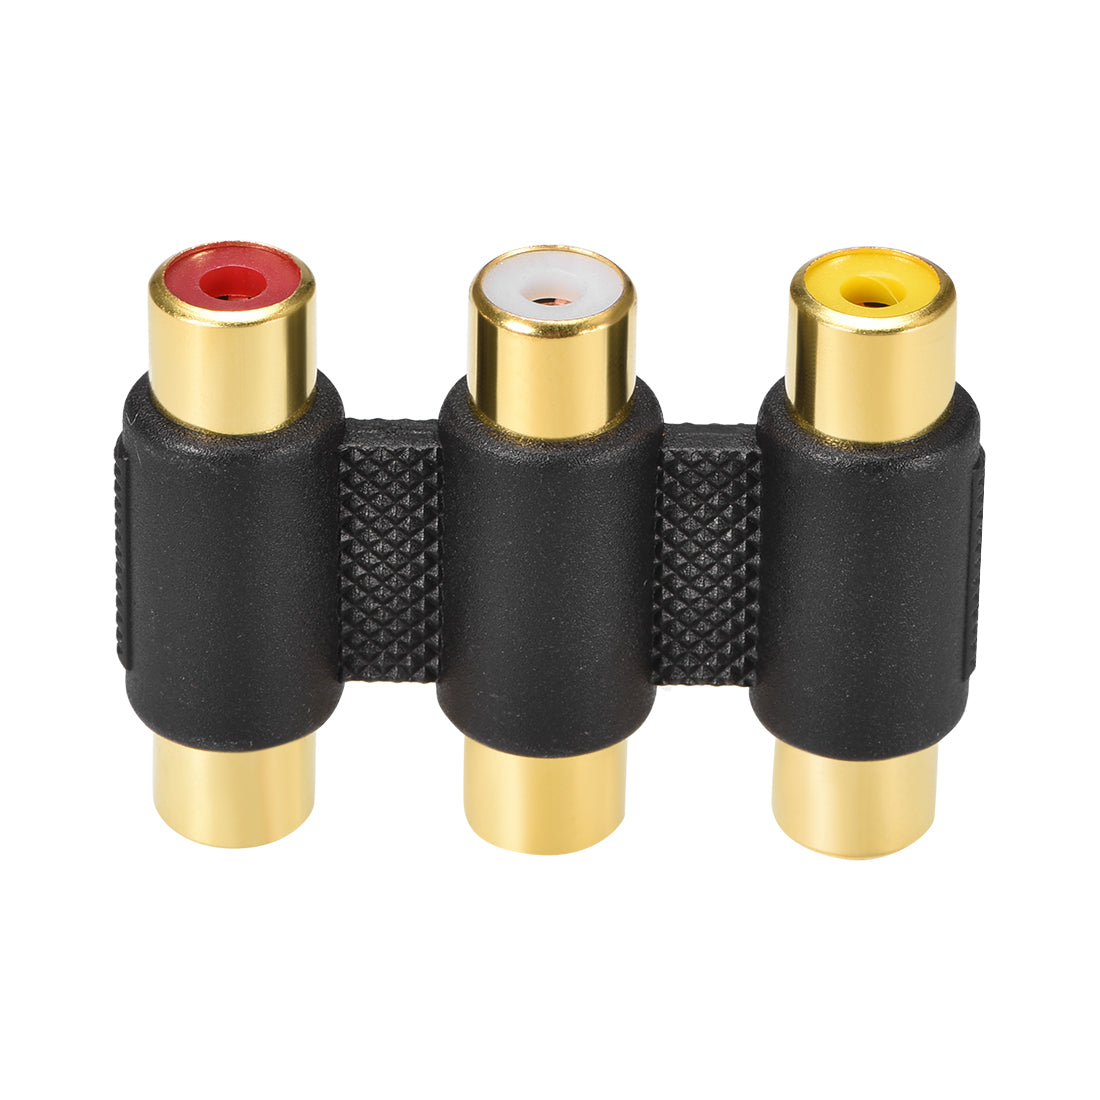 uxcell Uxcell Gold Plated 3-RCA Female to Female Jack Coupler Adapter White Red Yellow 2Pcs